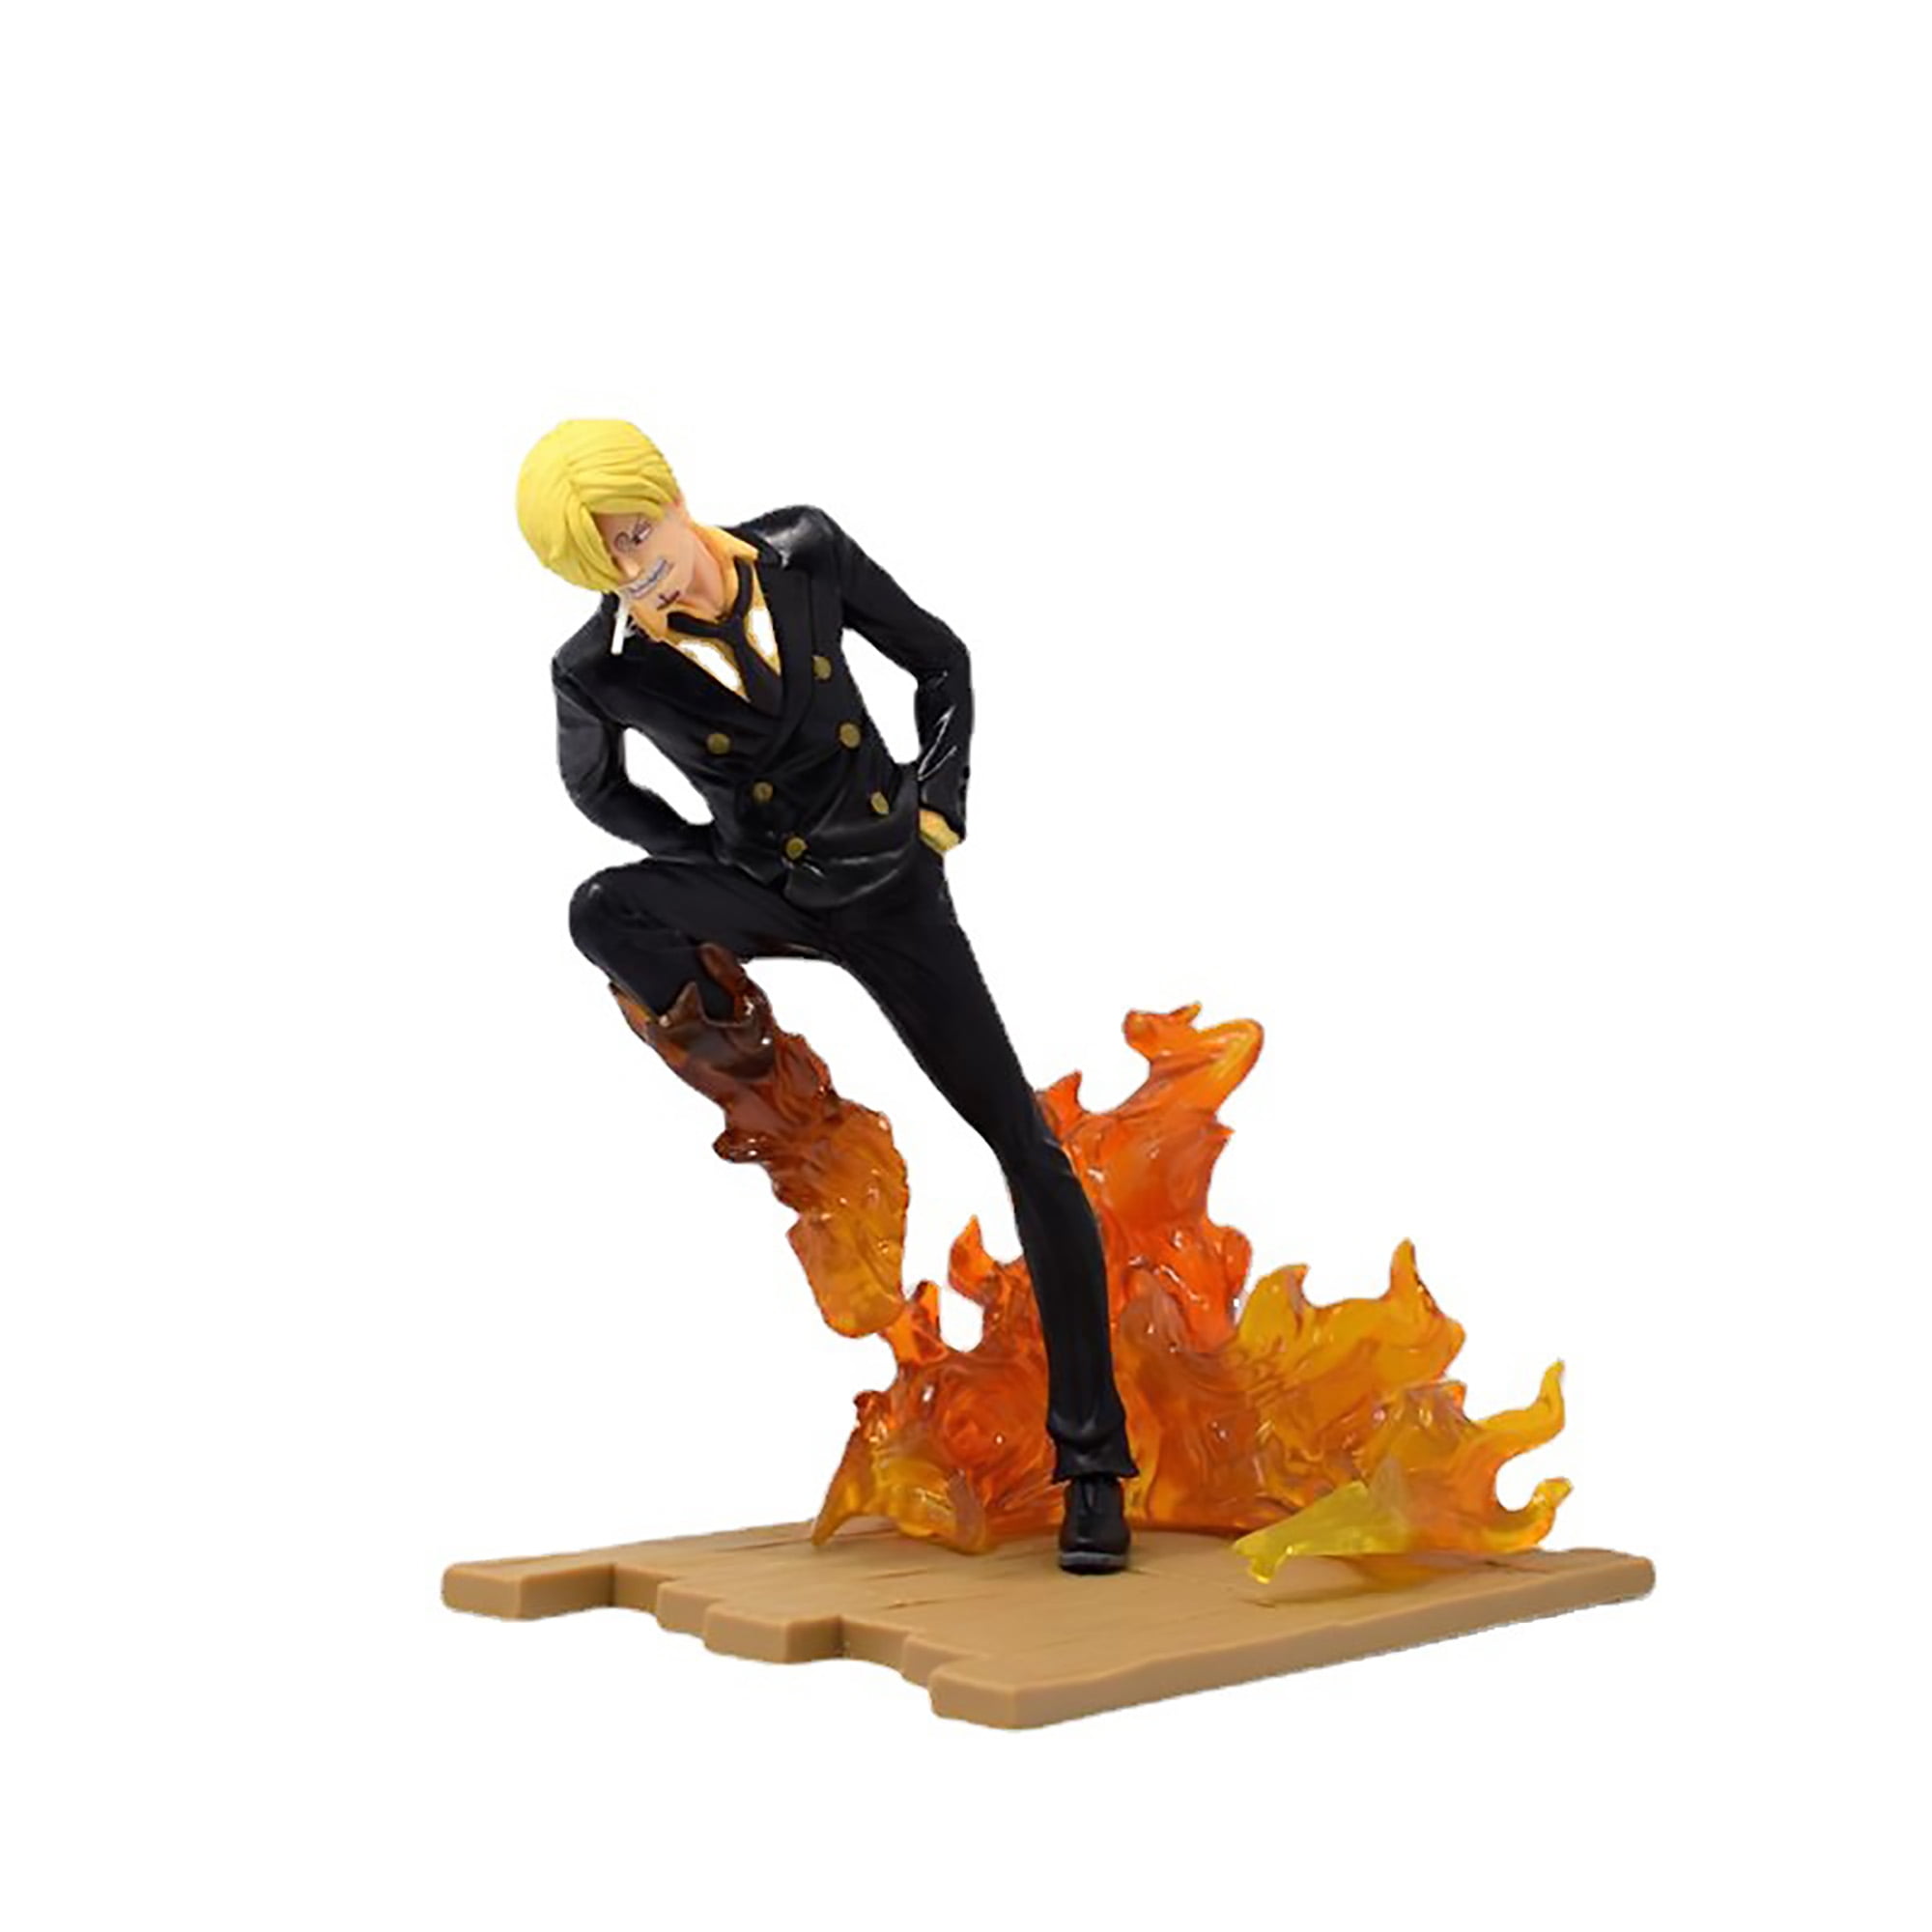 azazmjo Anime Figure PVC Action Figure Collection Figure Model Toys Gifts for Childrenanime One Piece Sanji Figurine PVC Seated Version Figurine Collection Model Toys Figurapvc Figure Model Statue